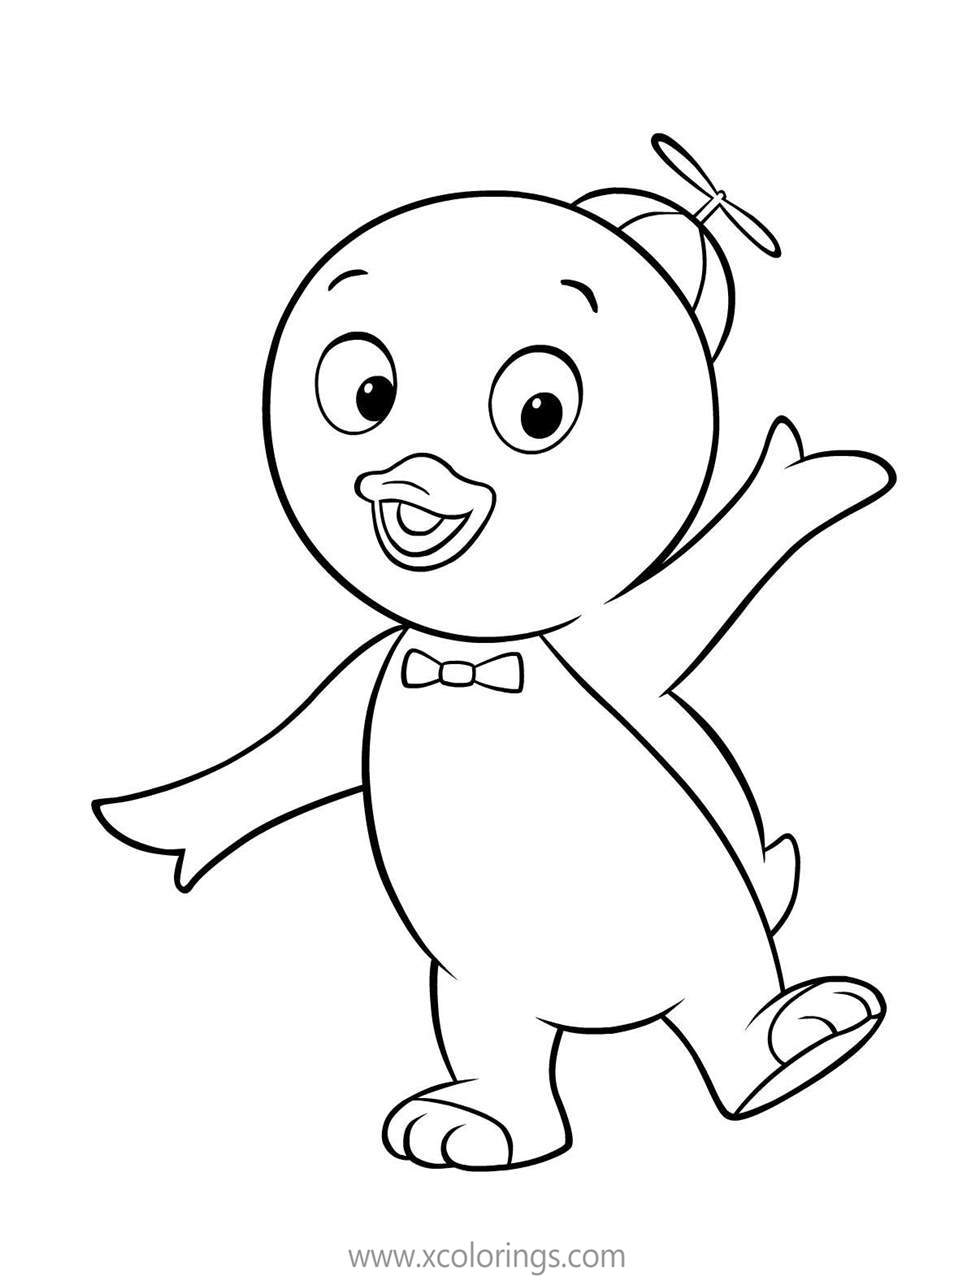 Free Backyardigans Coloring Pages Pablo the Penguin printable